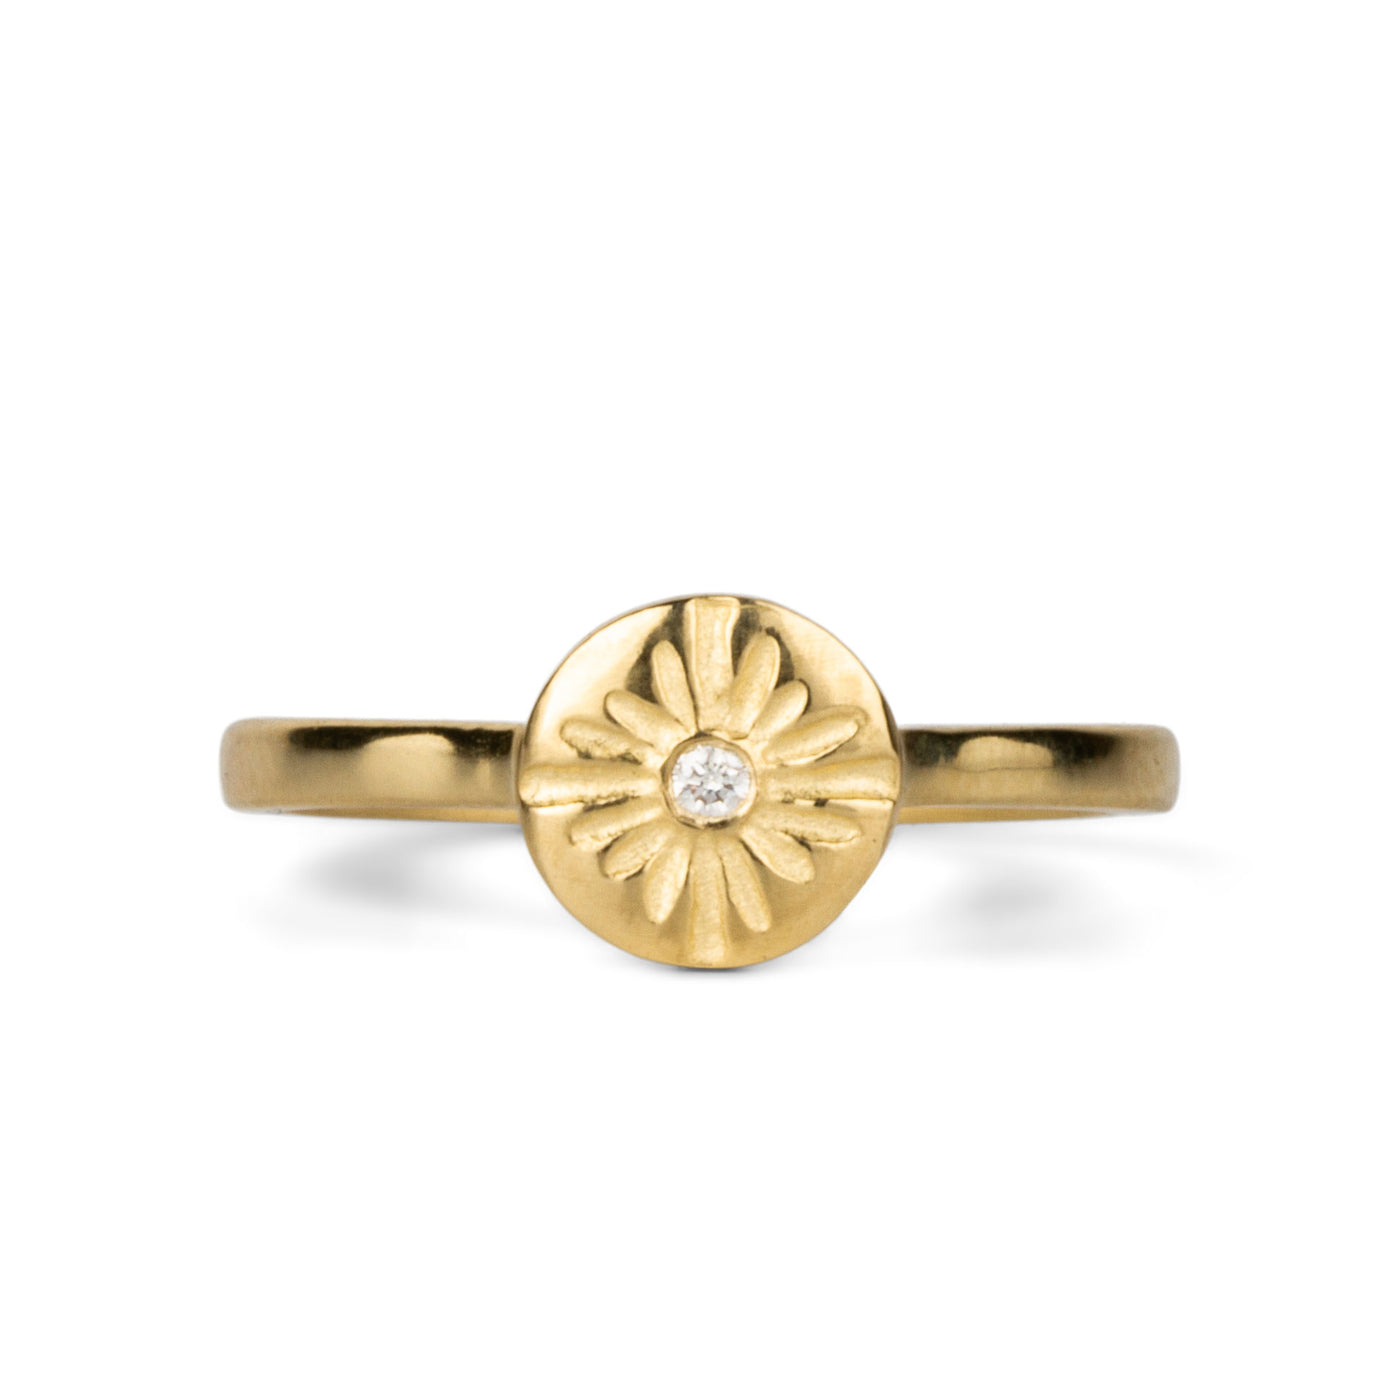 Lucia Small Yellow Gold and Diamond Ring front facing on a white background